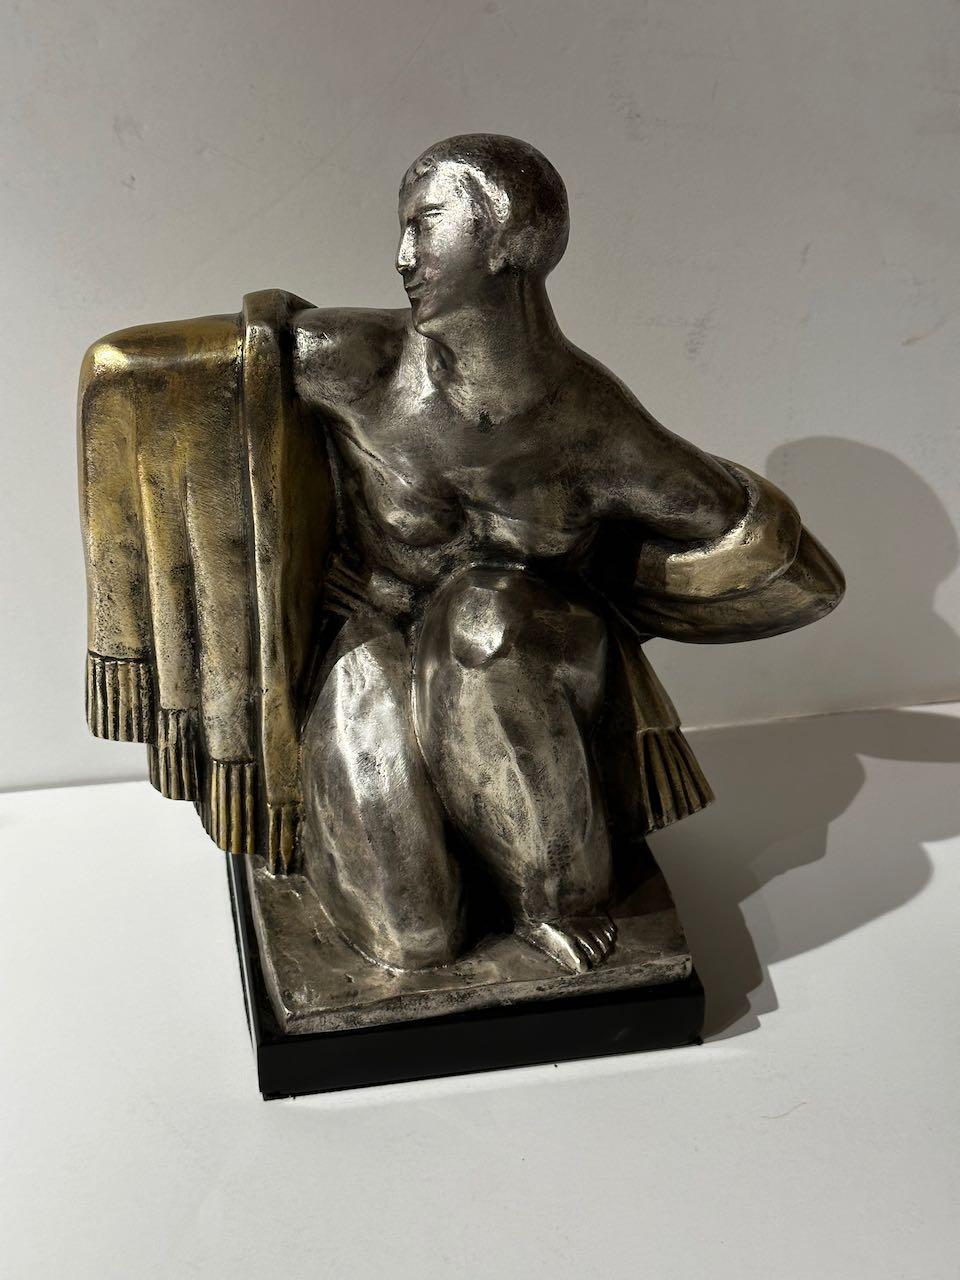 Jan Cannel, Belgian Sculptor Cubist Bronze Art Deco. This bronze version is extremely rare, this sculpture sometimes appears on the market made of Terracotta or plaster. Silver-plated bronze sculpture. Signed to the bronze. With a black marble base.